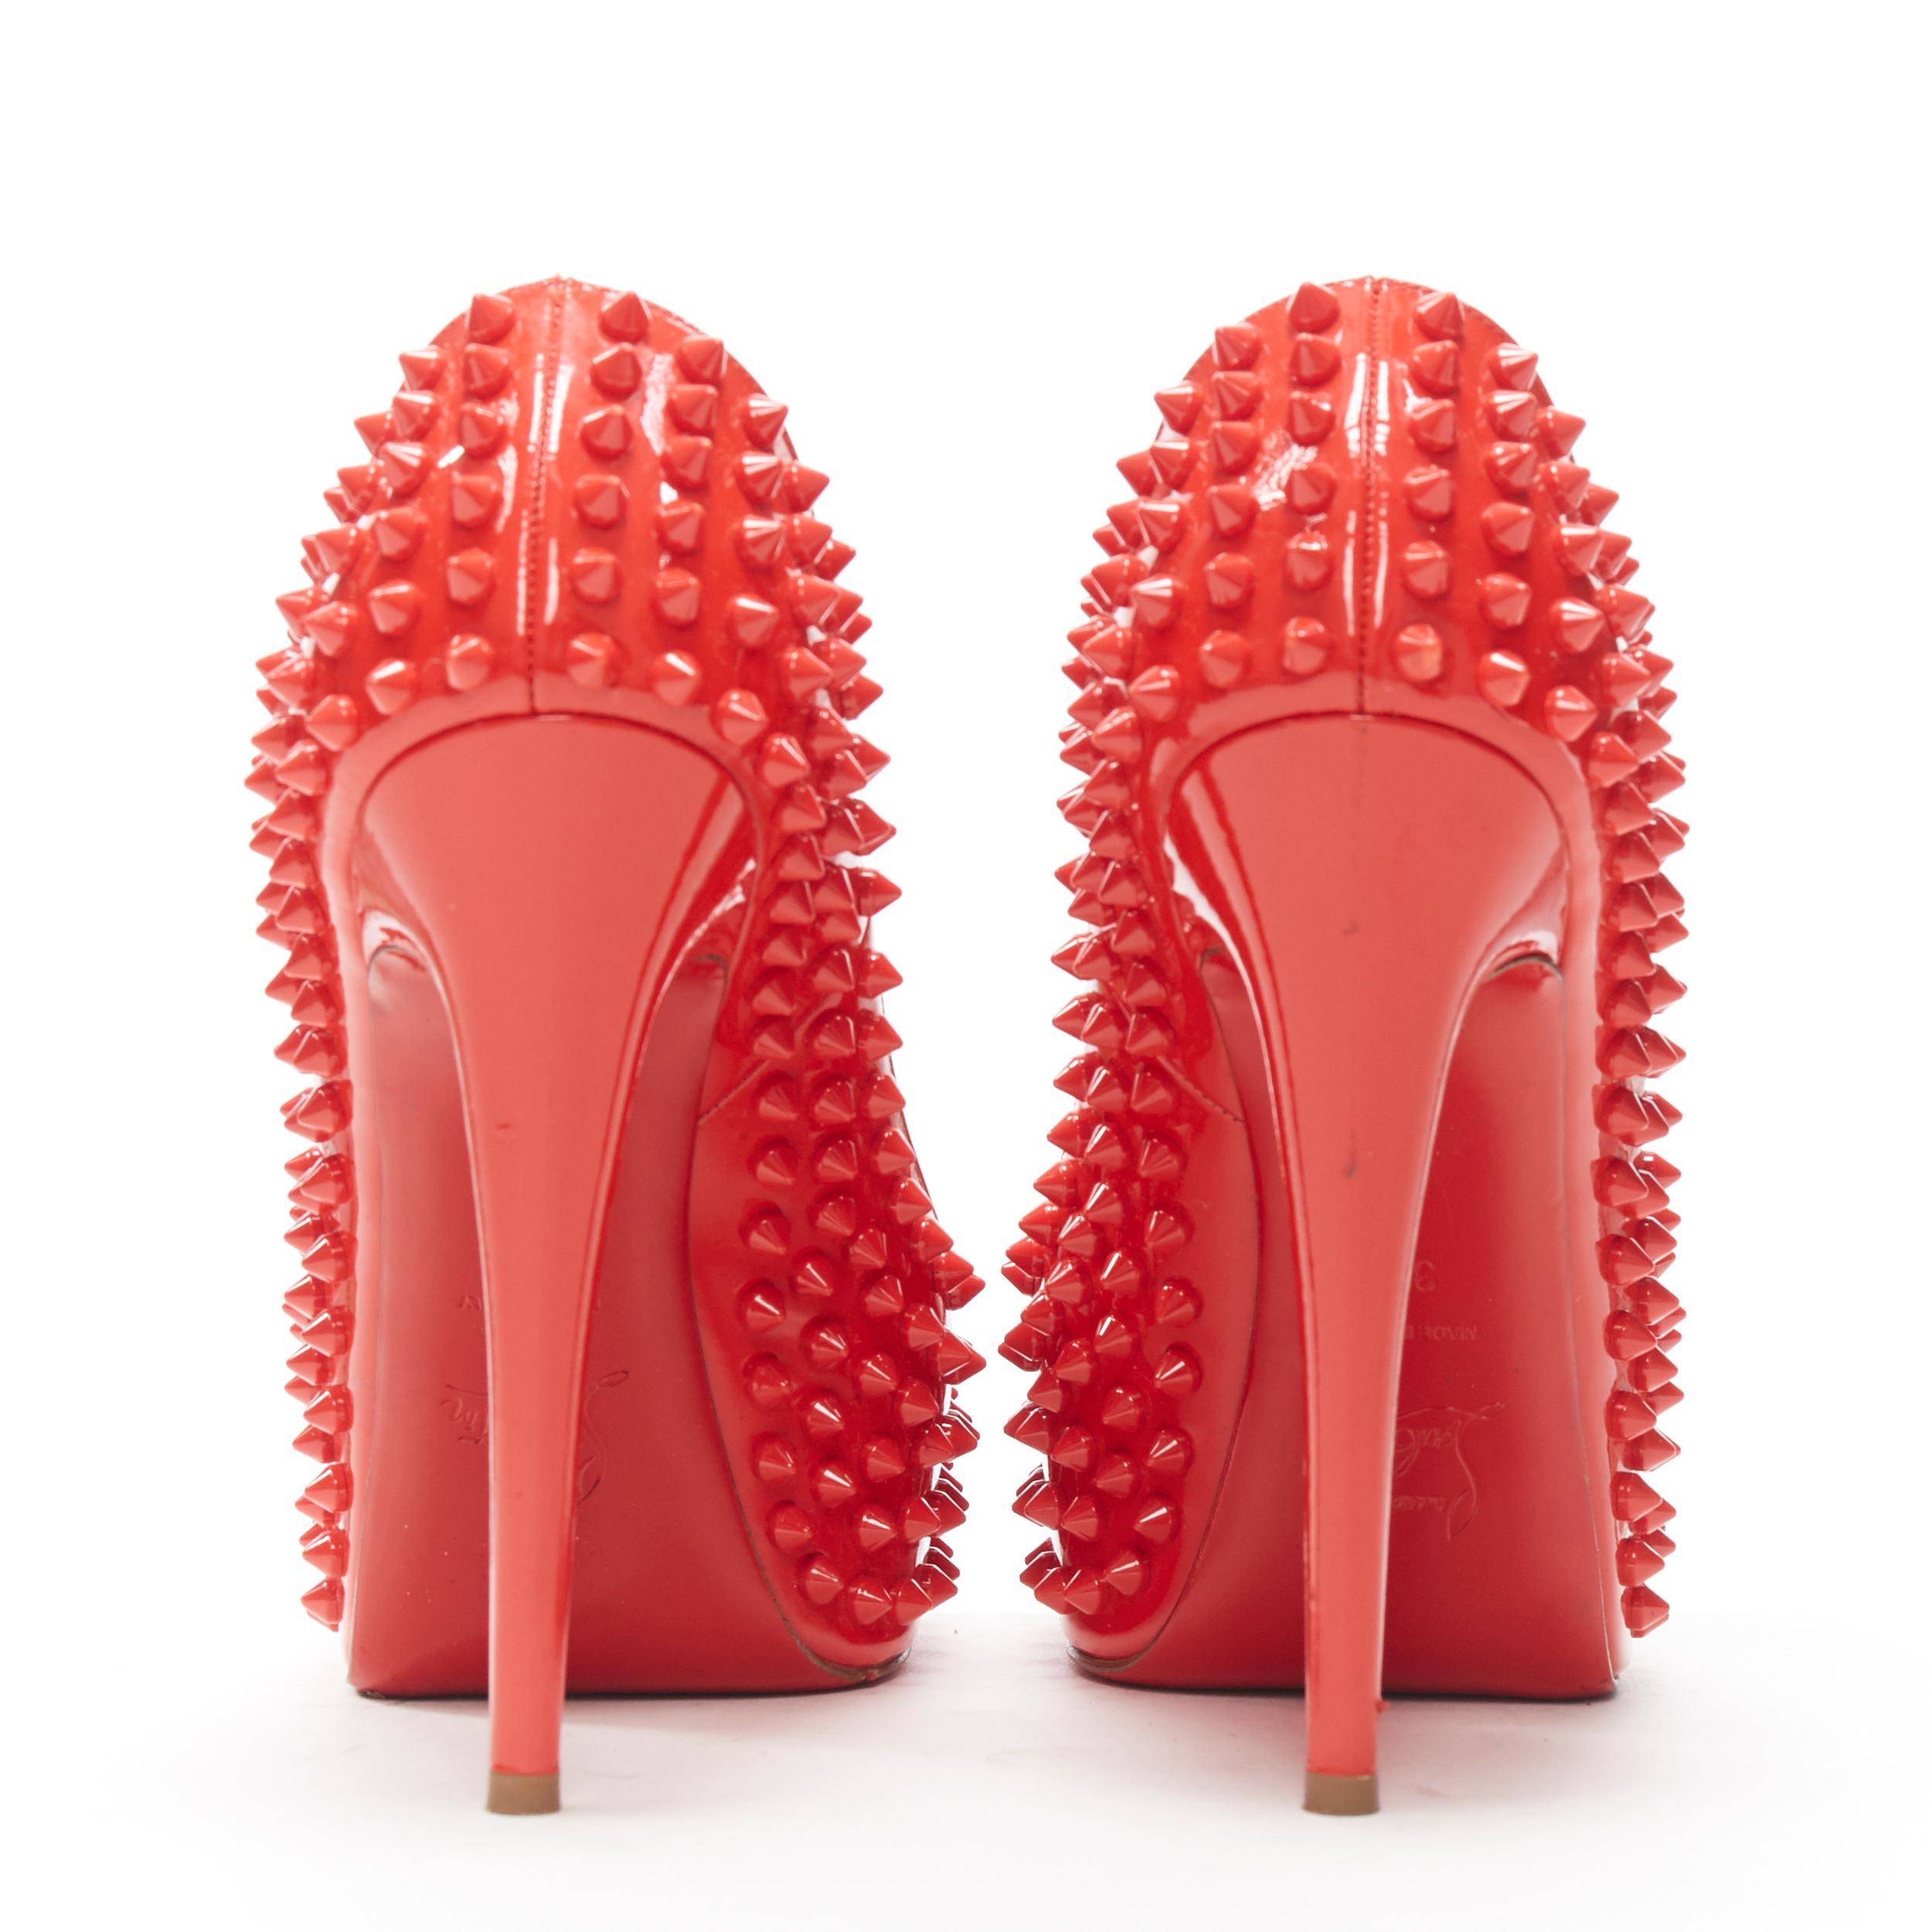 CHRISTIAN LOUBOUTIN red patent spike stud peep toe platform high heel pump EU39 Reference: TGAS/A03533 
Brand: Christian Louboutin 
Designer: Christian Louboutin 
Material: Patent leather 
Color: Red 
Pattern: Solid 
Closure: Slip on 
Extra Detail: